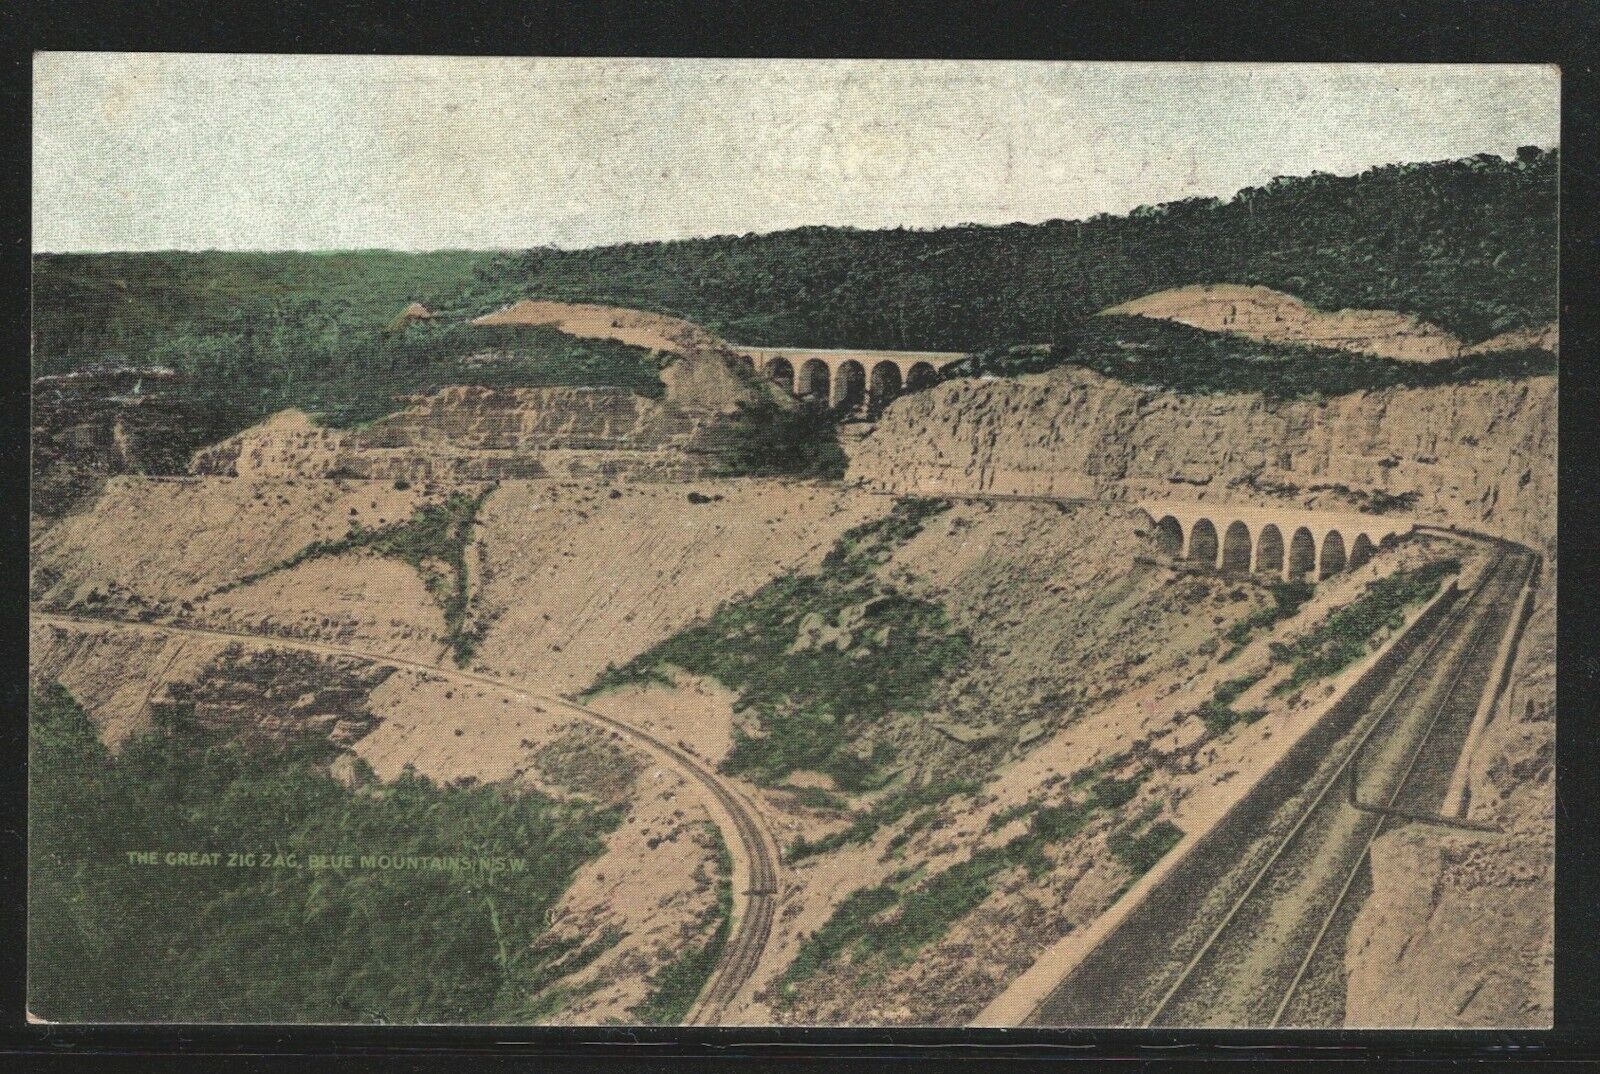 The Great Zig Zag, Blue Mountains, New South Wales, Australia, Early Postcard